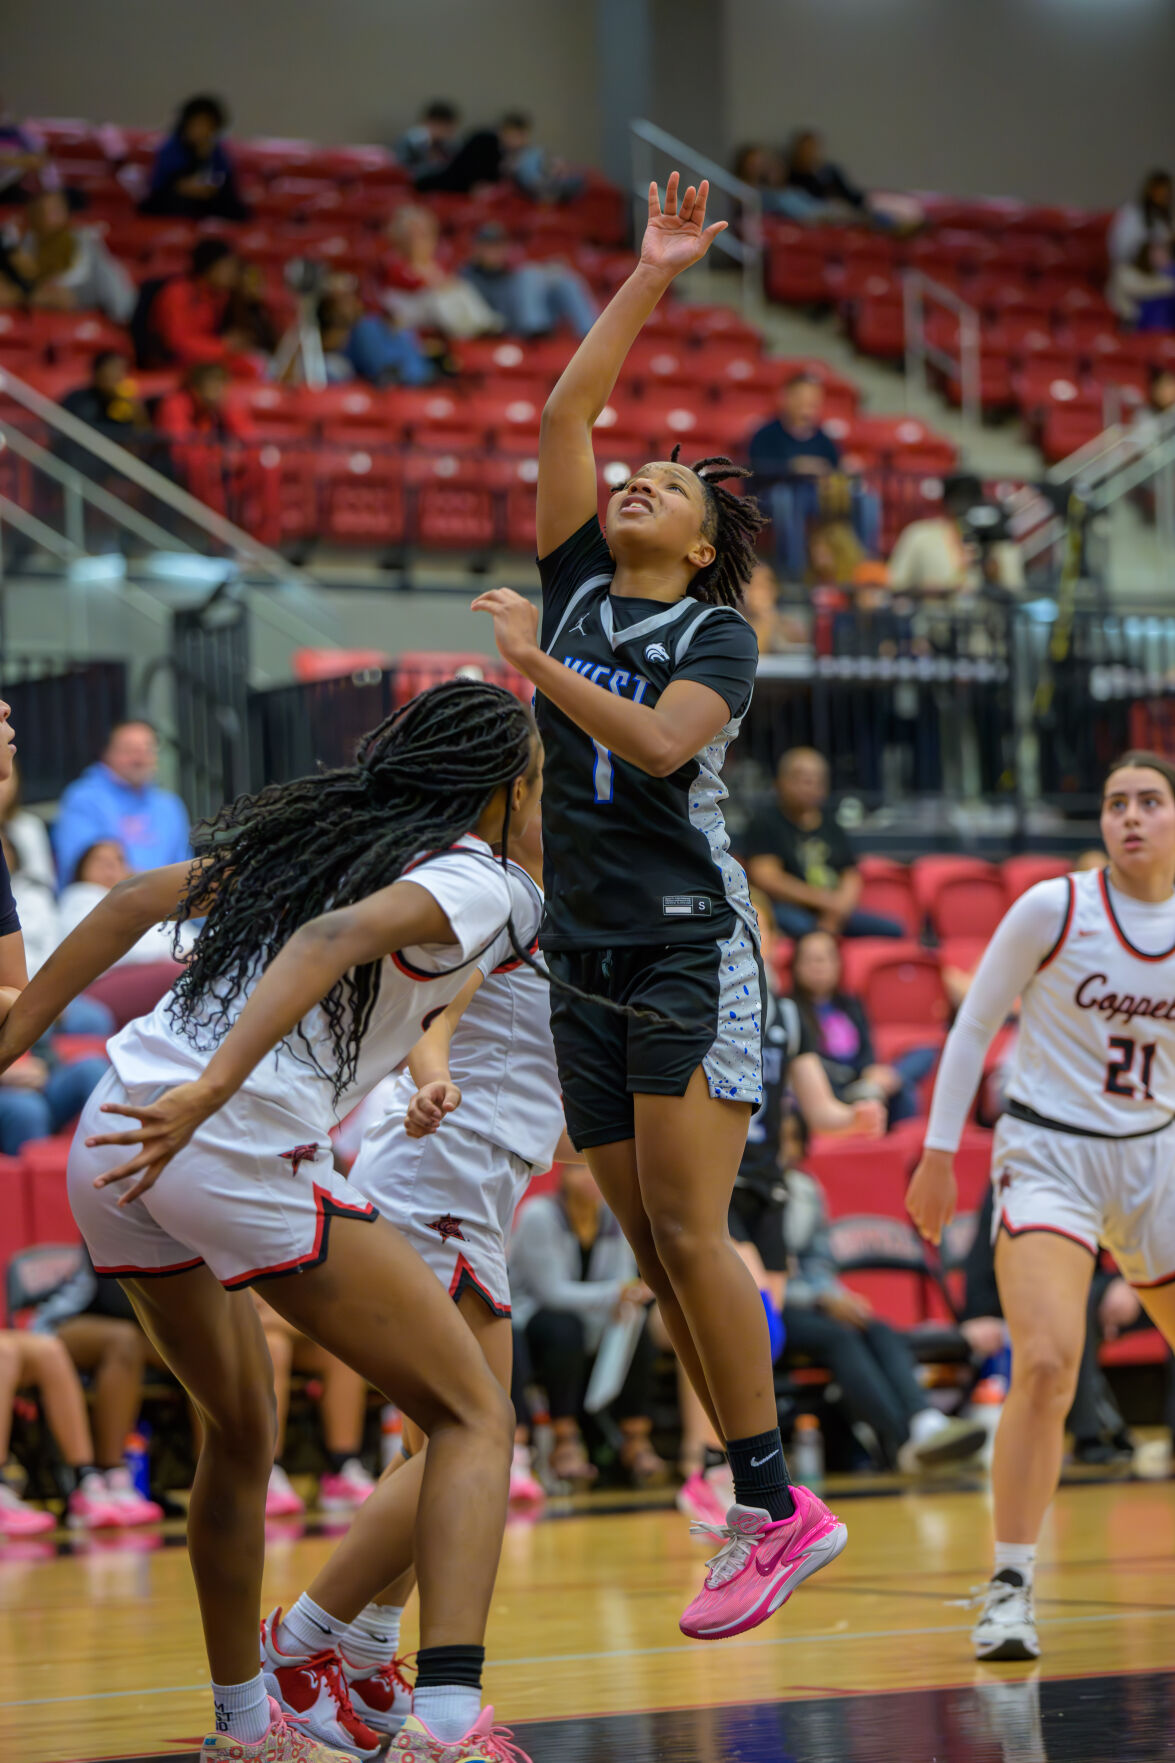 Plano West Girls Basketball Team Triumphs Over Flower Mound in Thrilling District Matchup